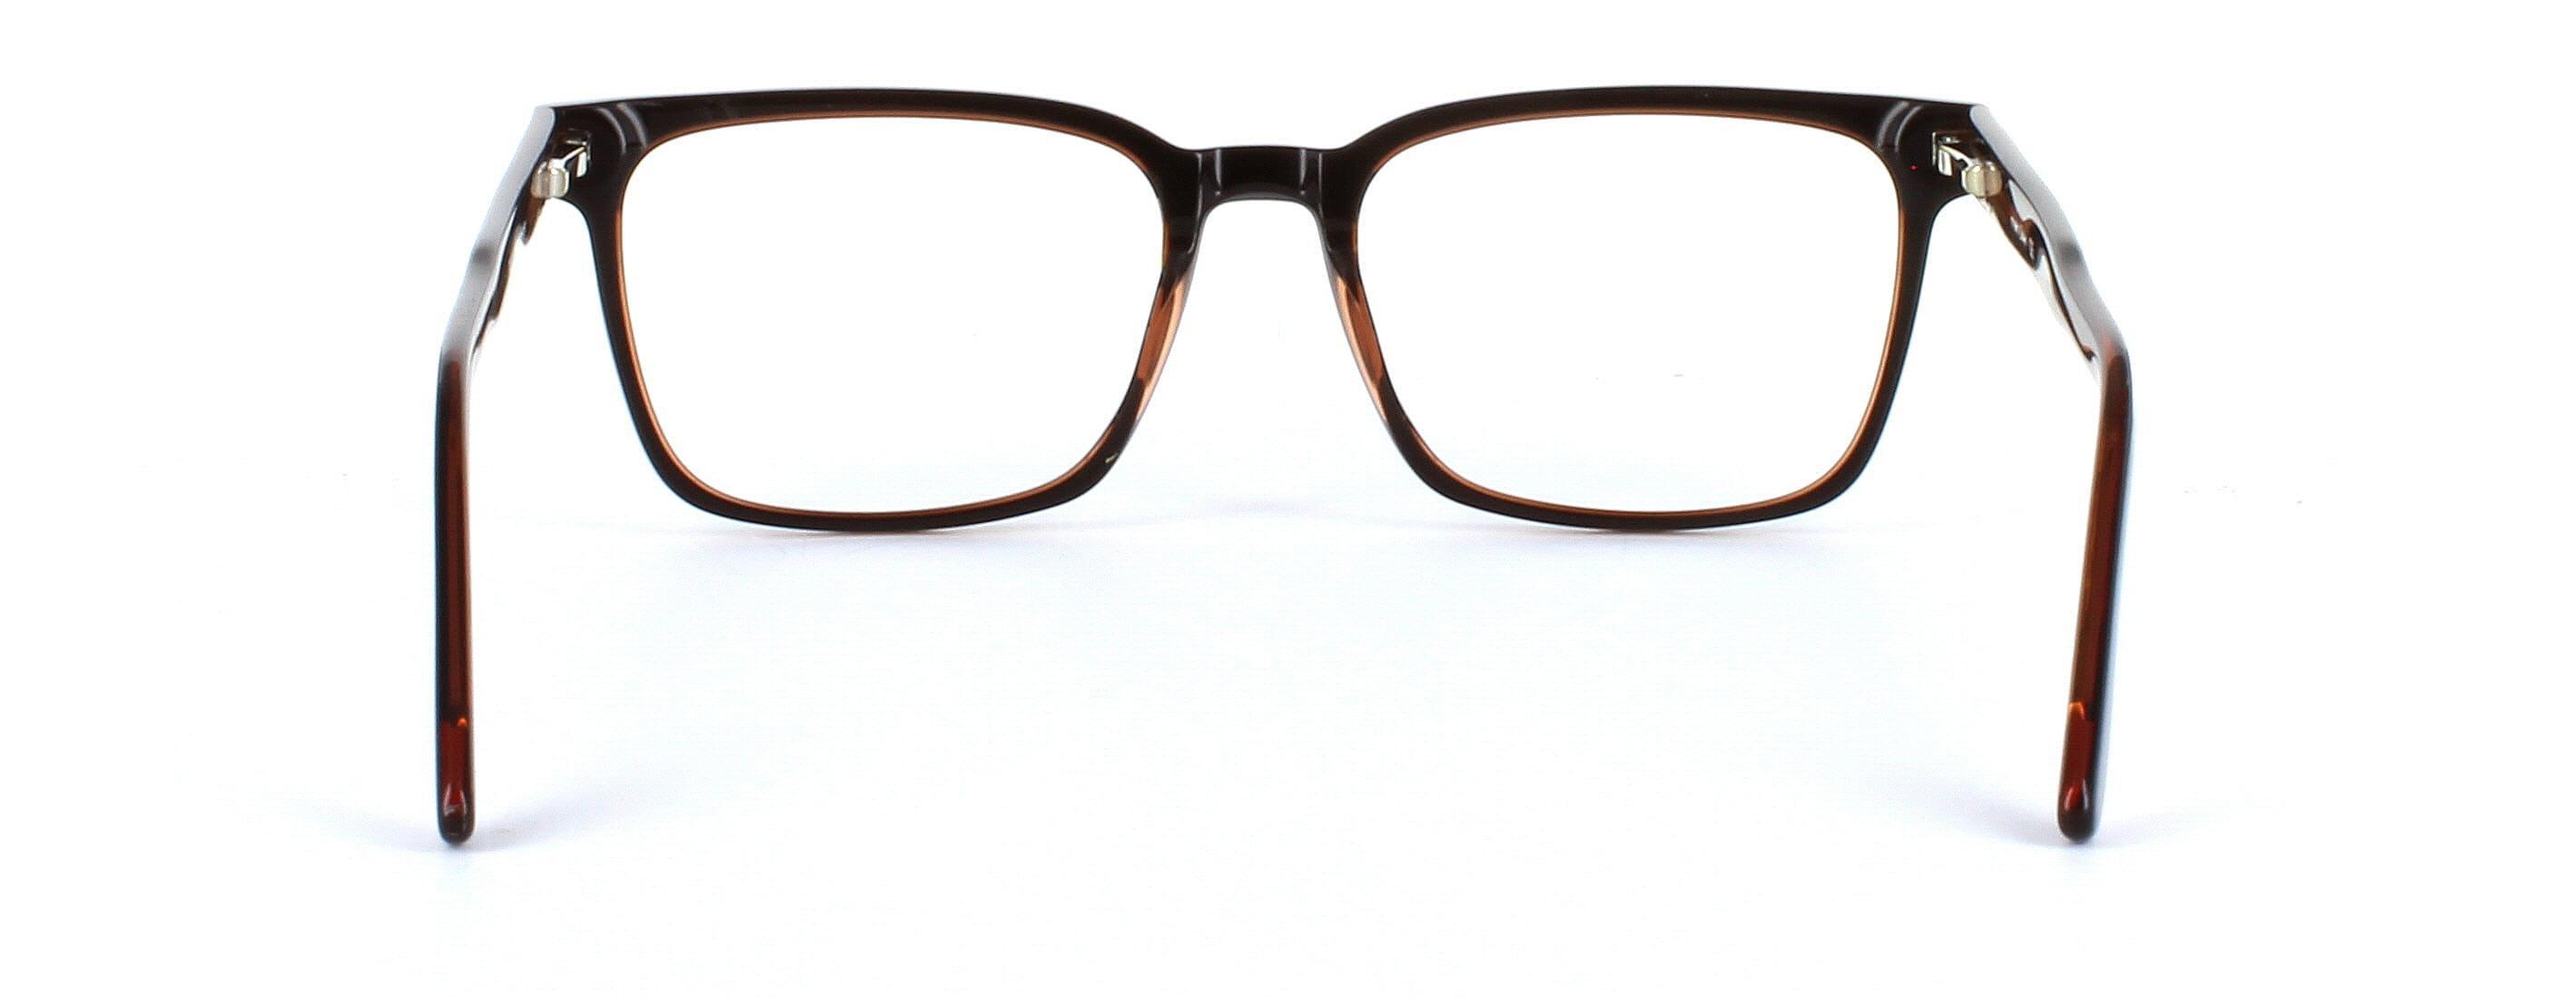 Sparta - Gents acetate glasses in brown - image view 3